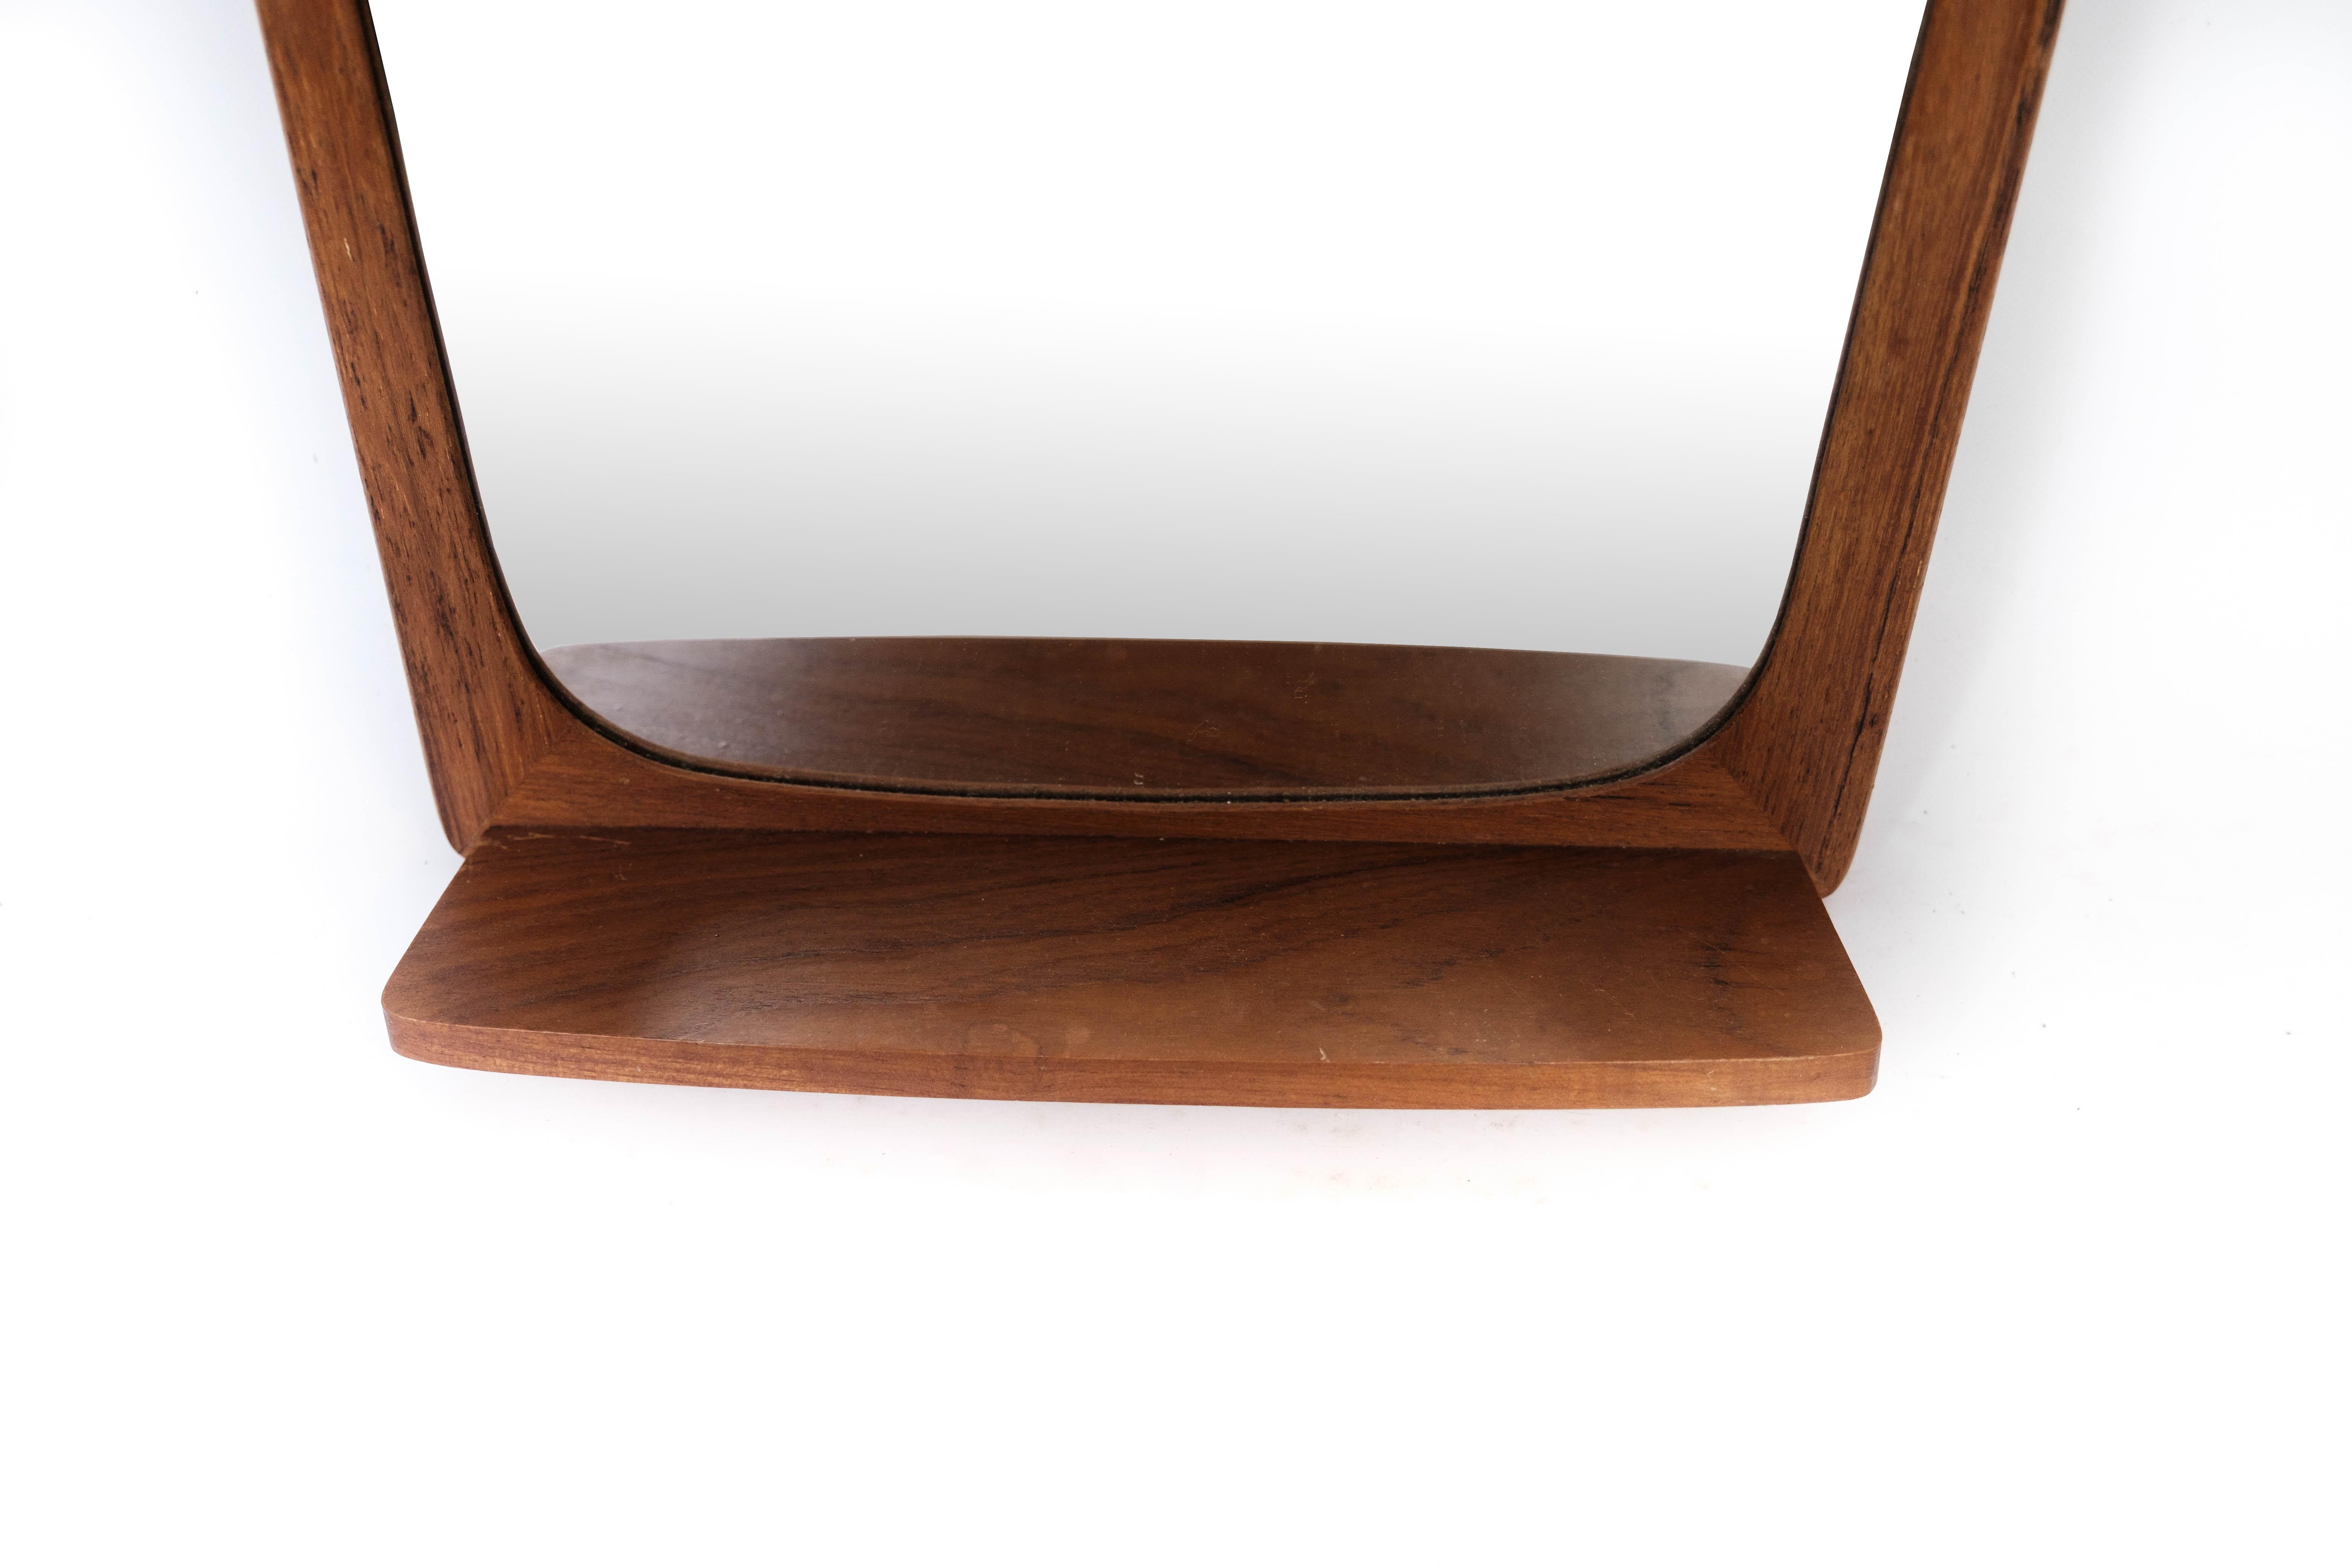 Mid-Century Modern Mirror Made In Teak With Shelf, Danish Design From 1960s For Sale